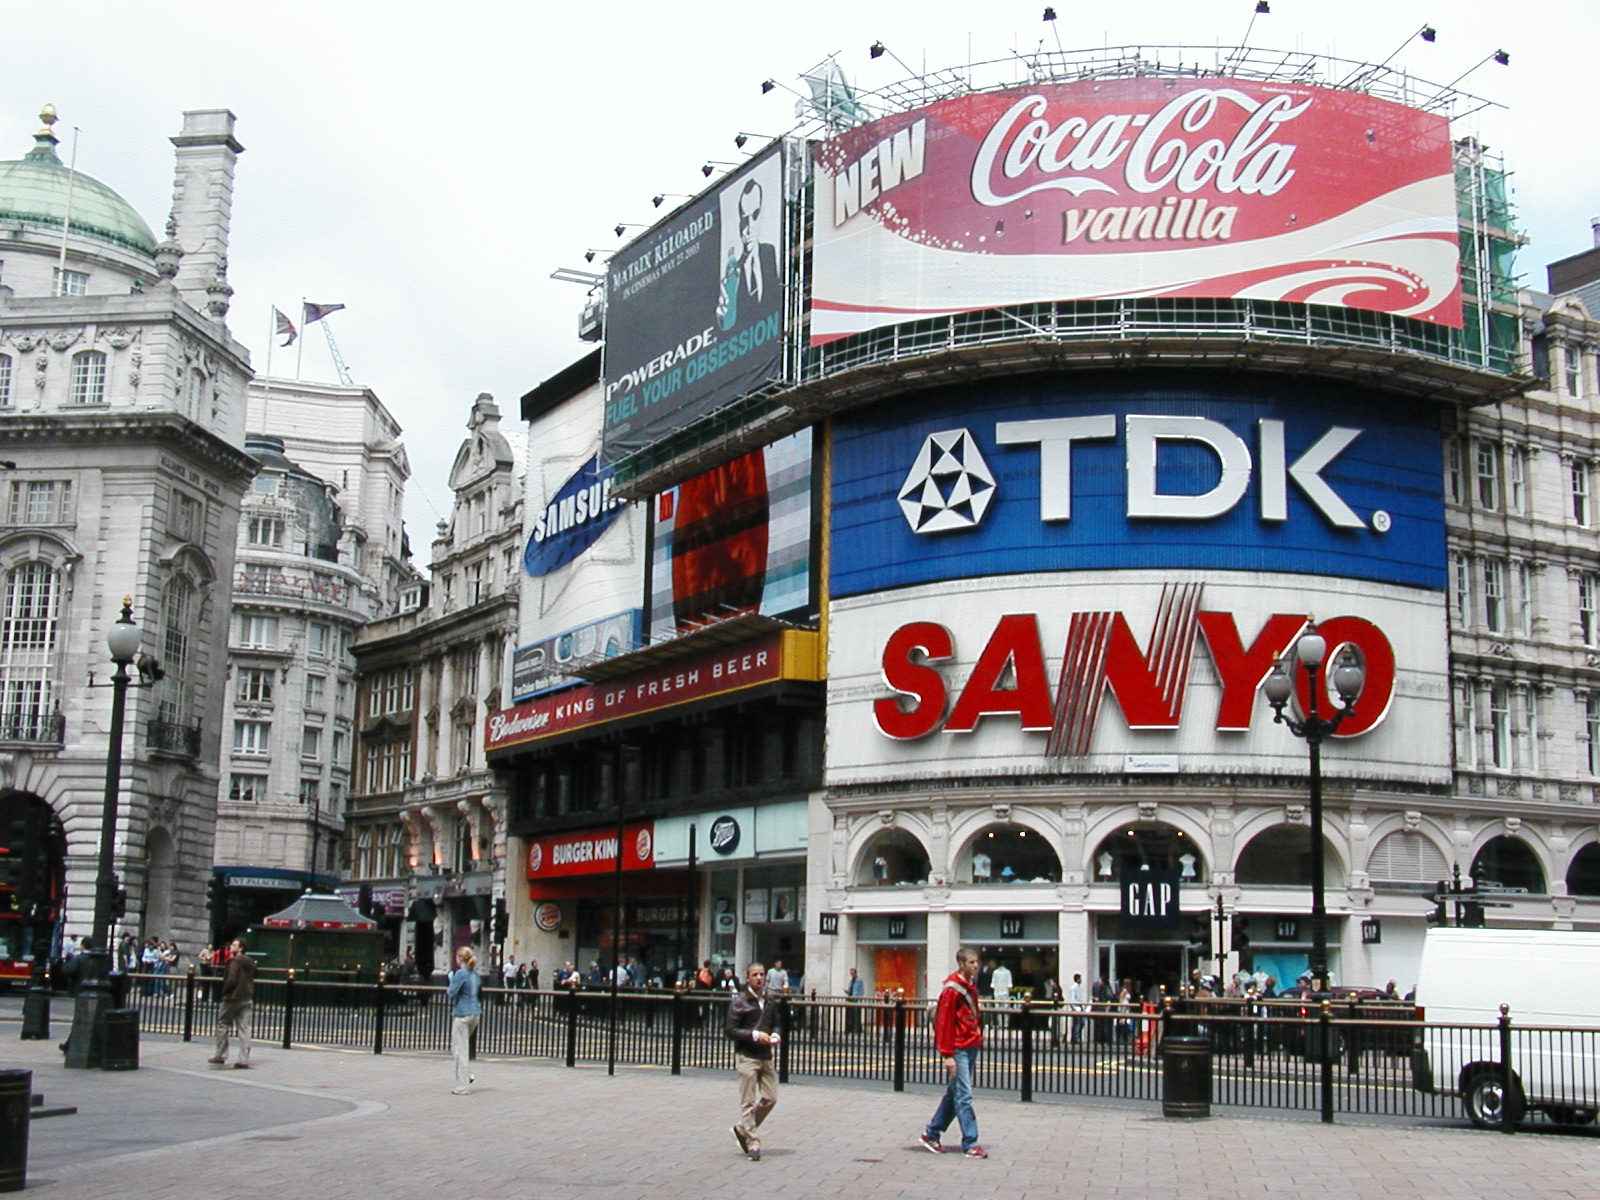 A Trip Without an End: Piccadilly Circus - London